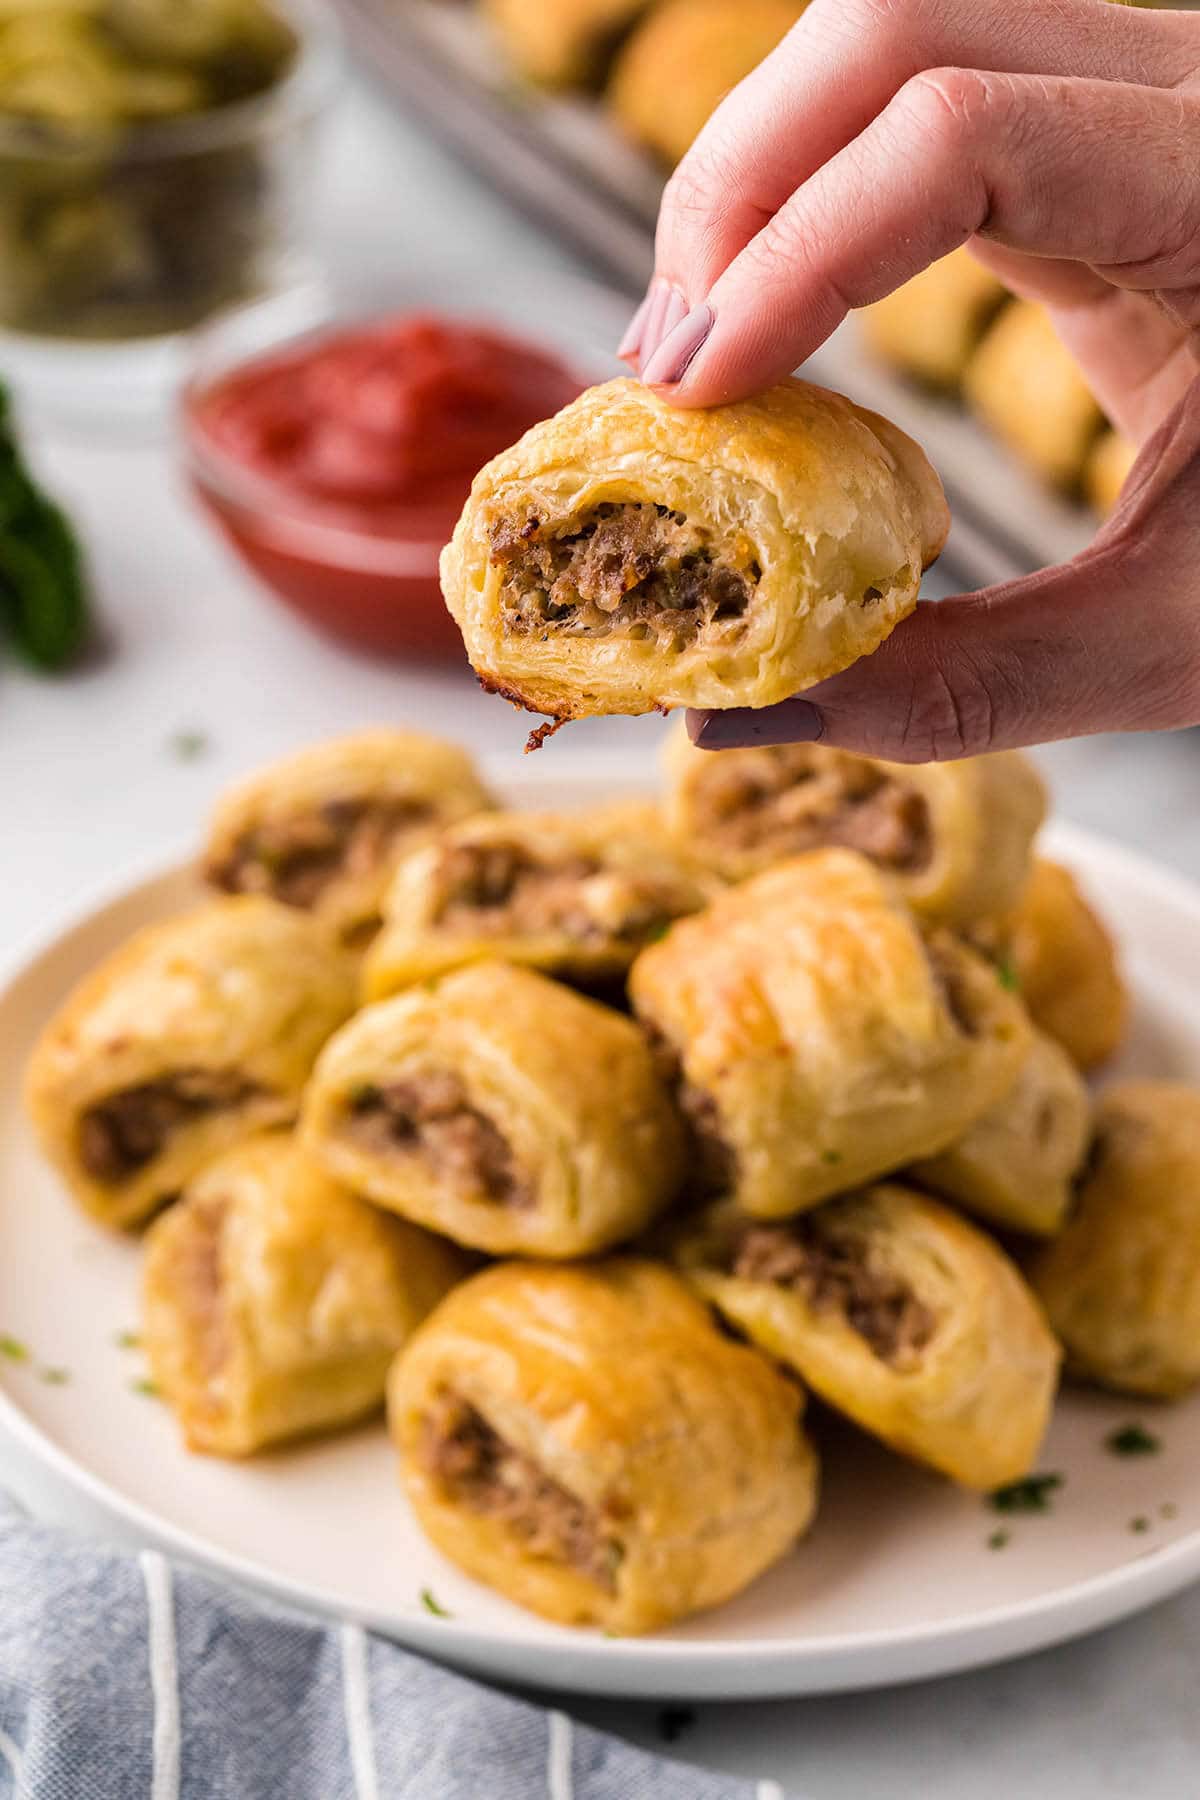 Puff Pastry Sausage Rolls on a platter with a hand holding one of the pastry rolls for a close up look.